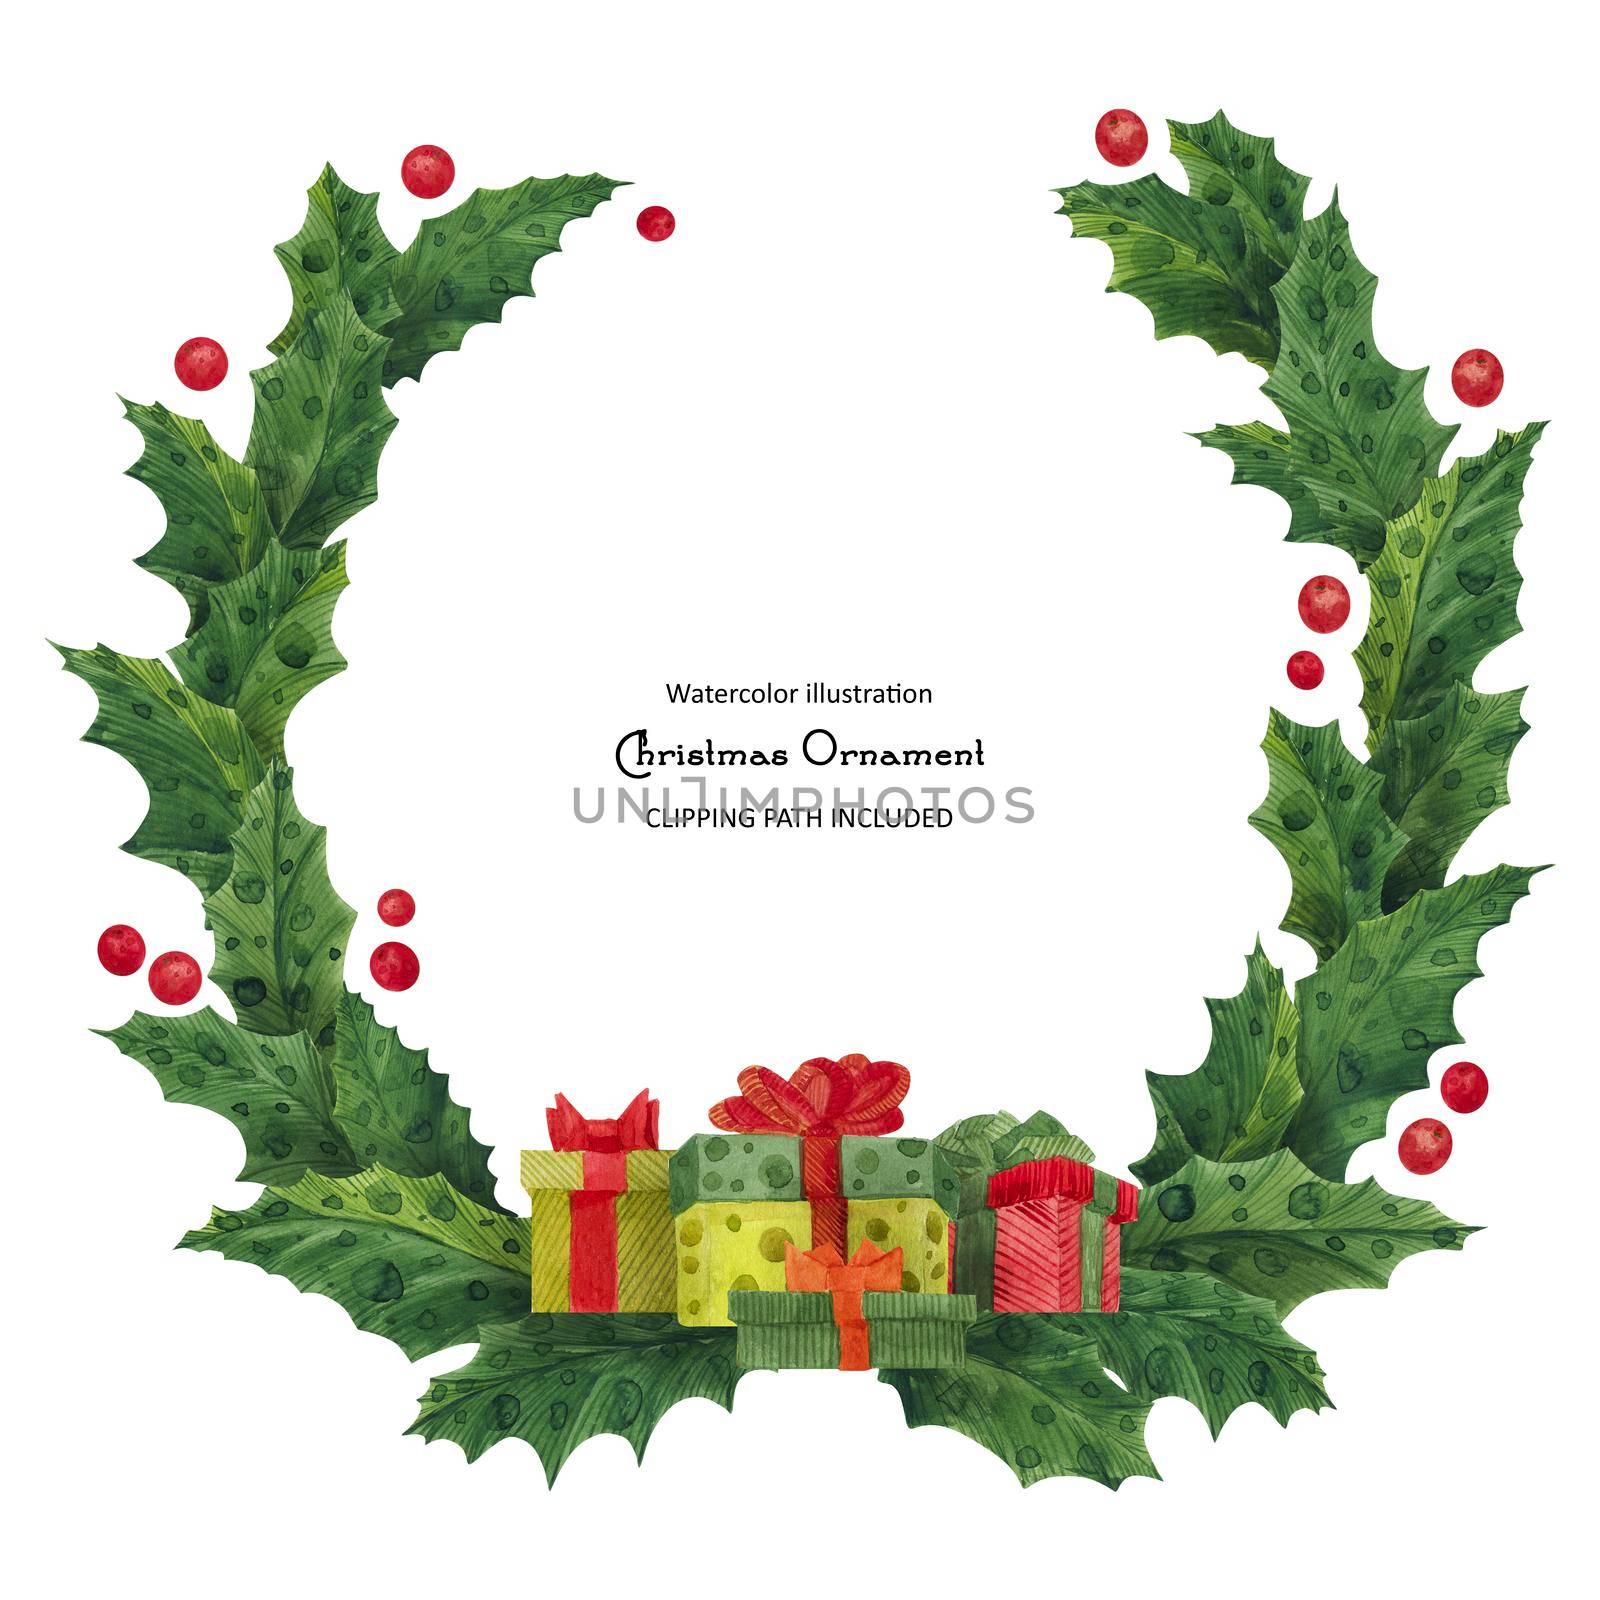 Christmas holly wreath with gift boxes and candy canes, isolated watercolor illustration and clipping path